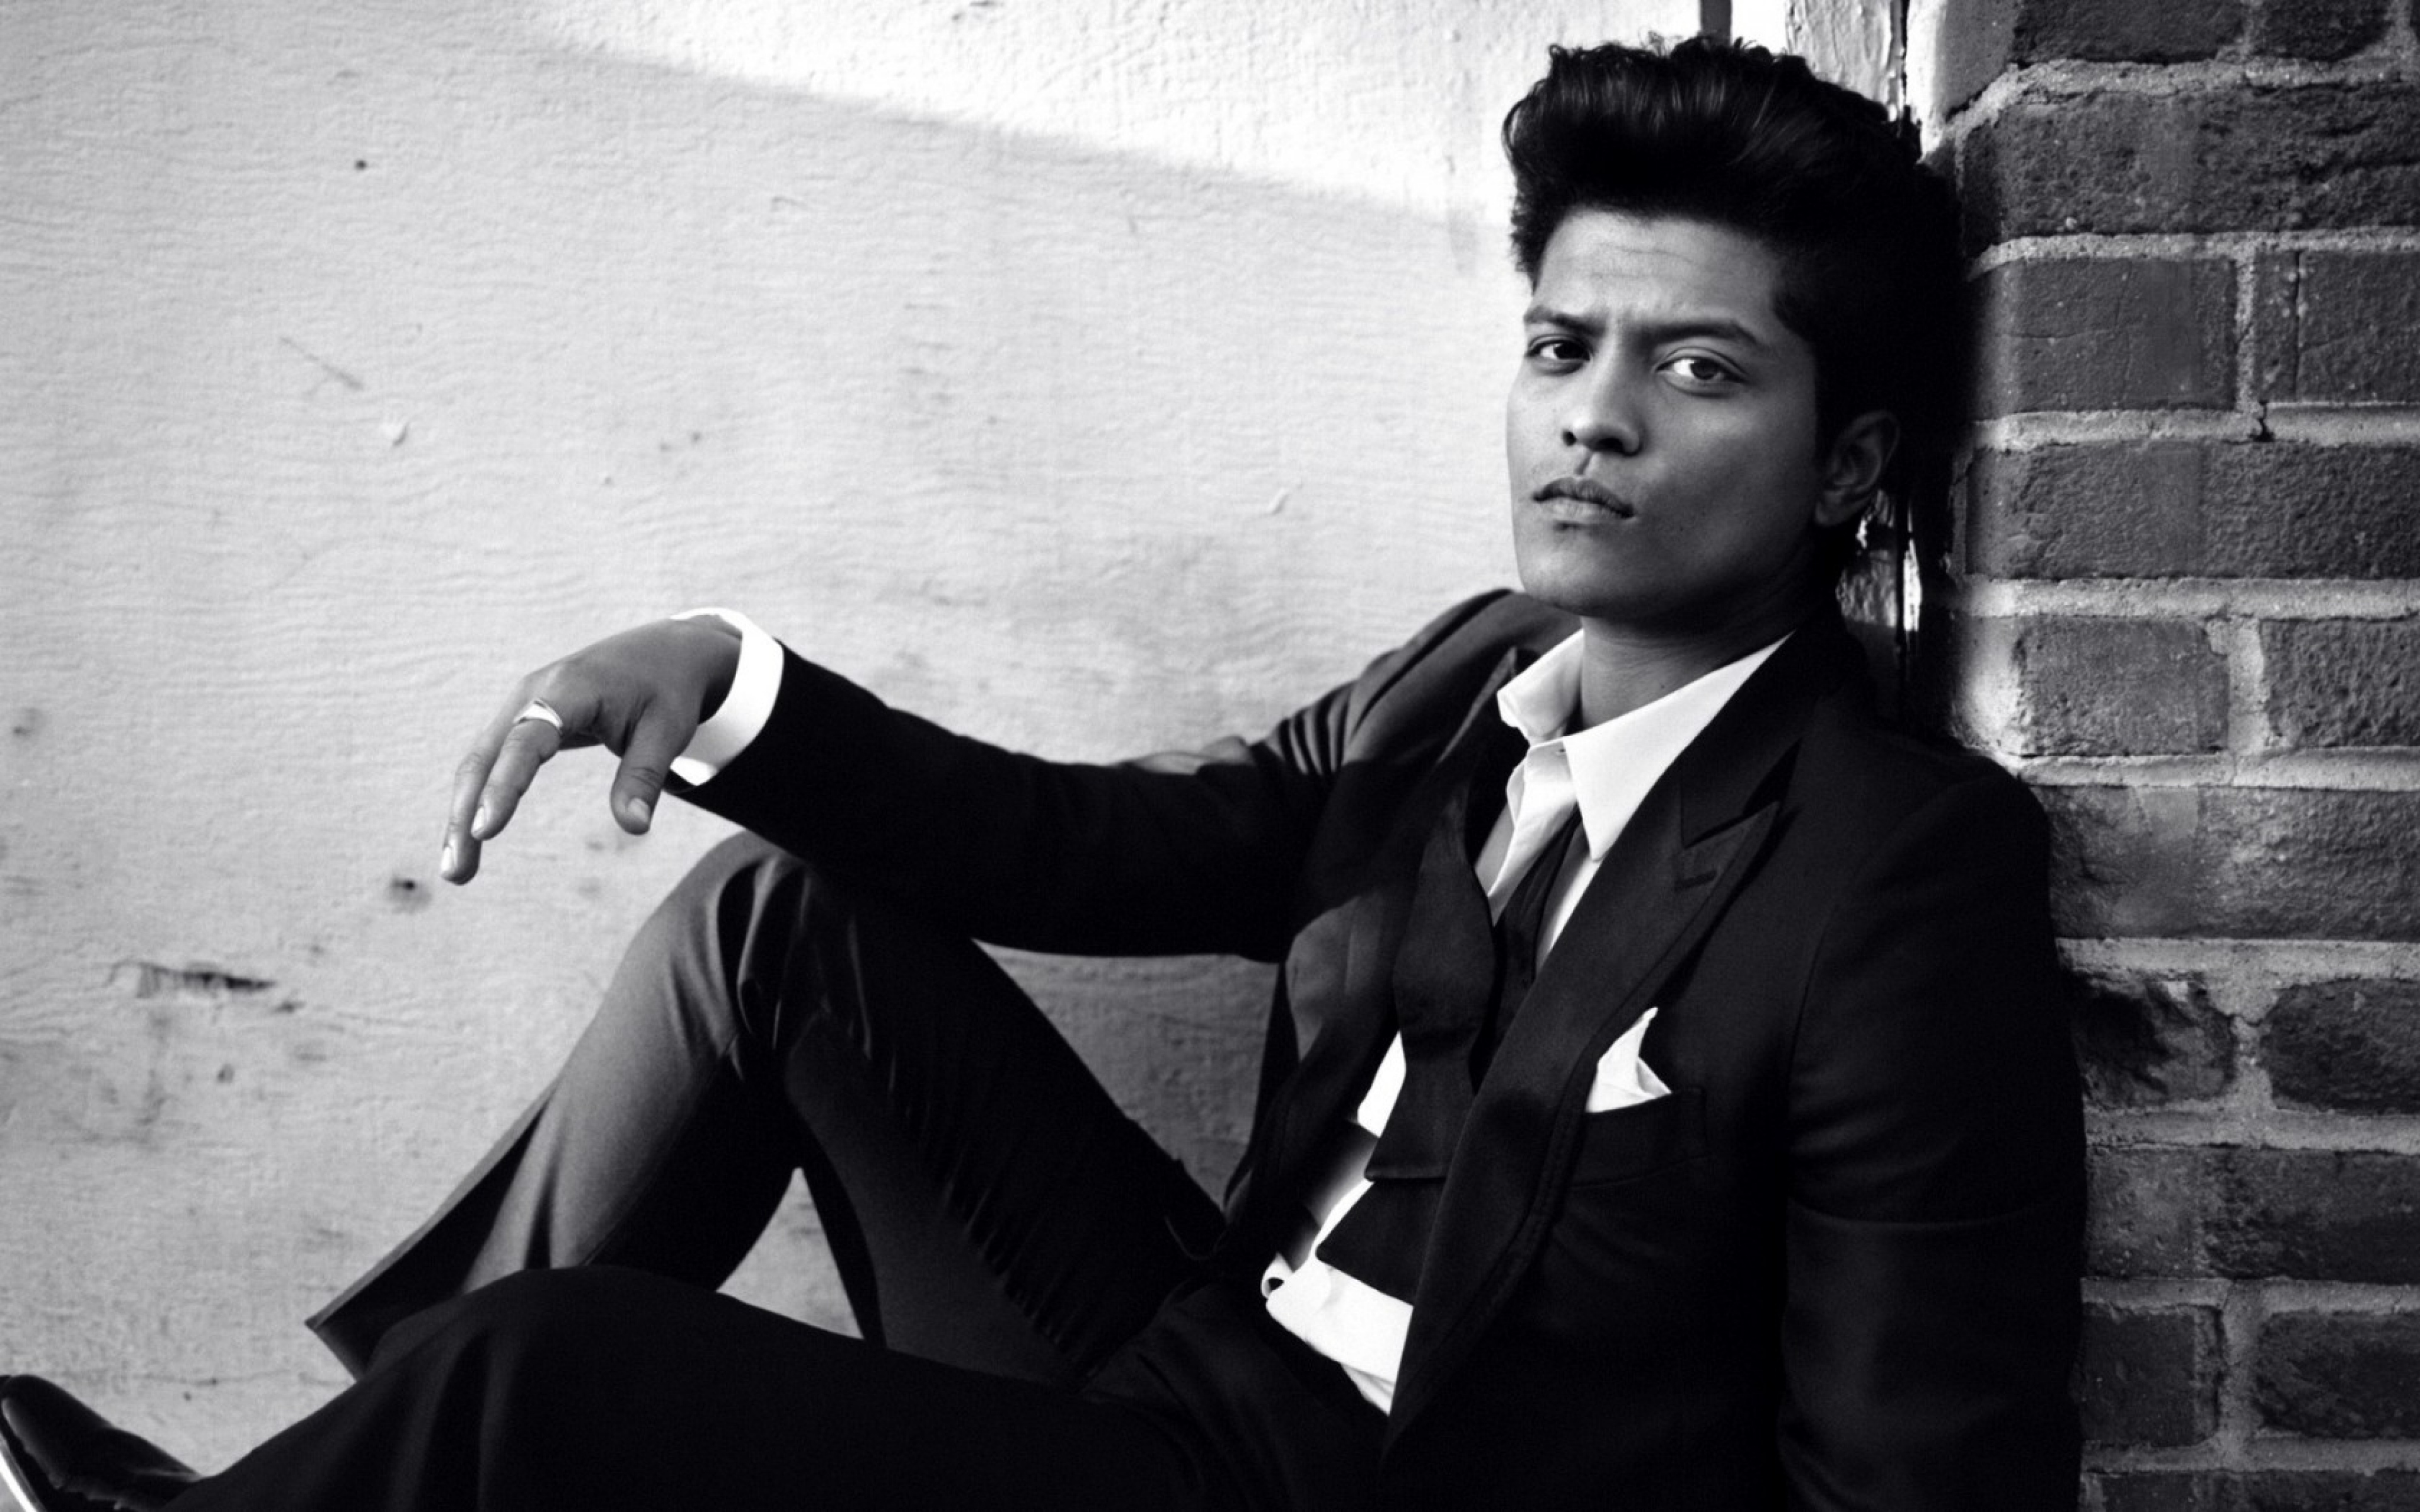 bruno mars wallpaper hd,suit,formal wear,black and white,fashion,monochrome photography